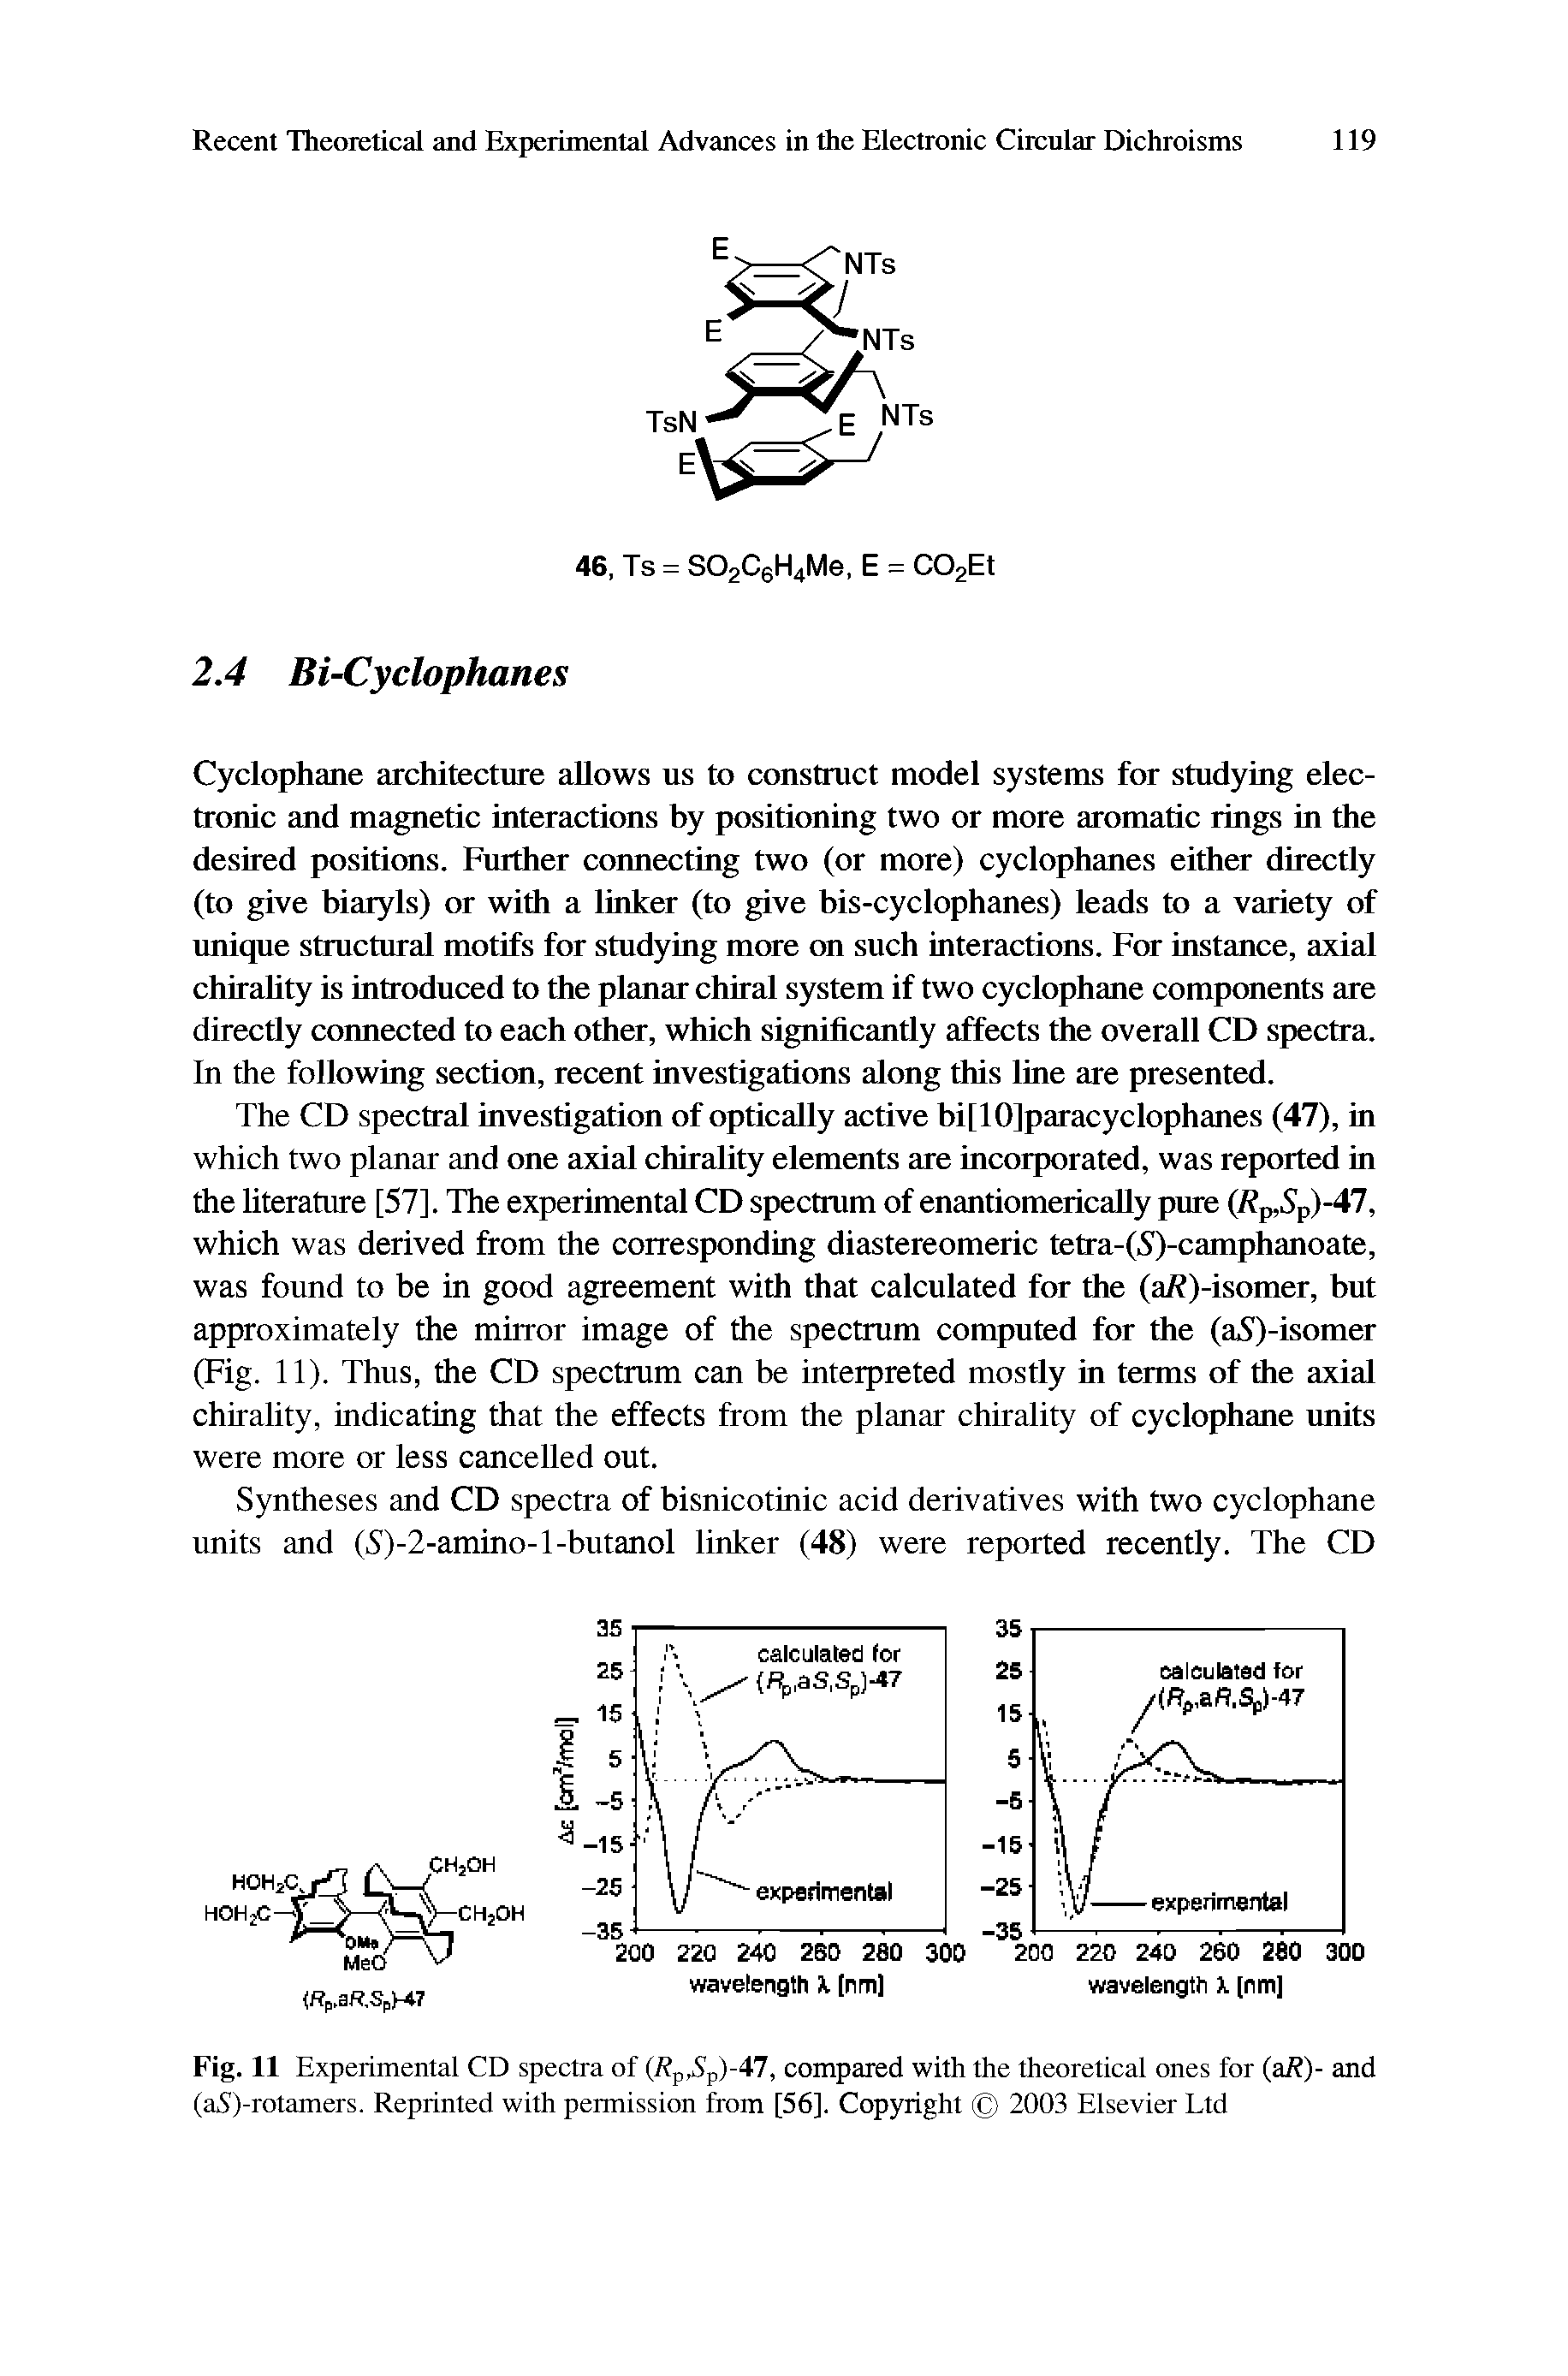 Fig. 11 Experimental CD spectra of (Rp,Sp)-47, compared with the theoretical ones for (aR)- and (aS)-rotamers. Reprinted with permission from [56]. Copyright 2003 Elsevier Ltd...